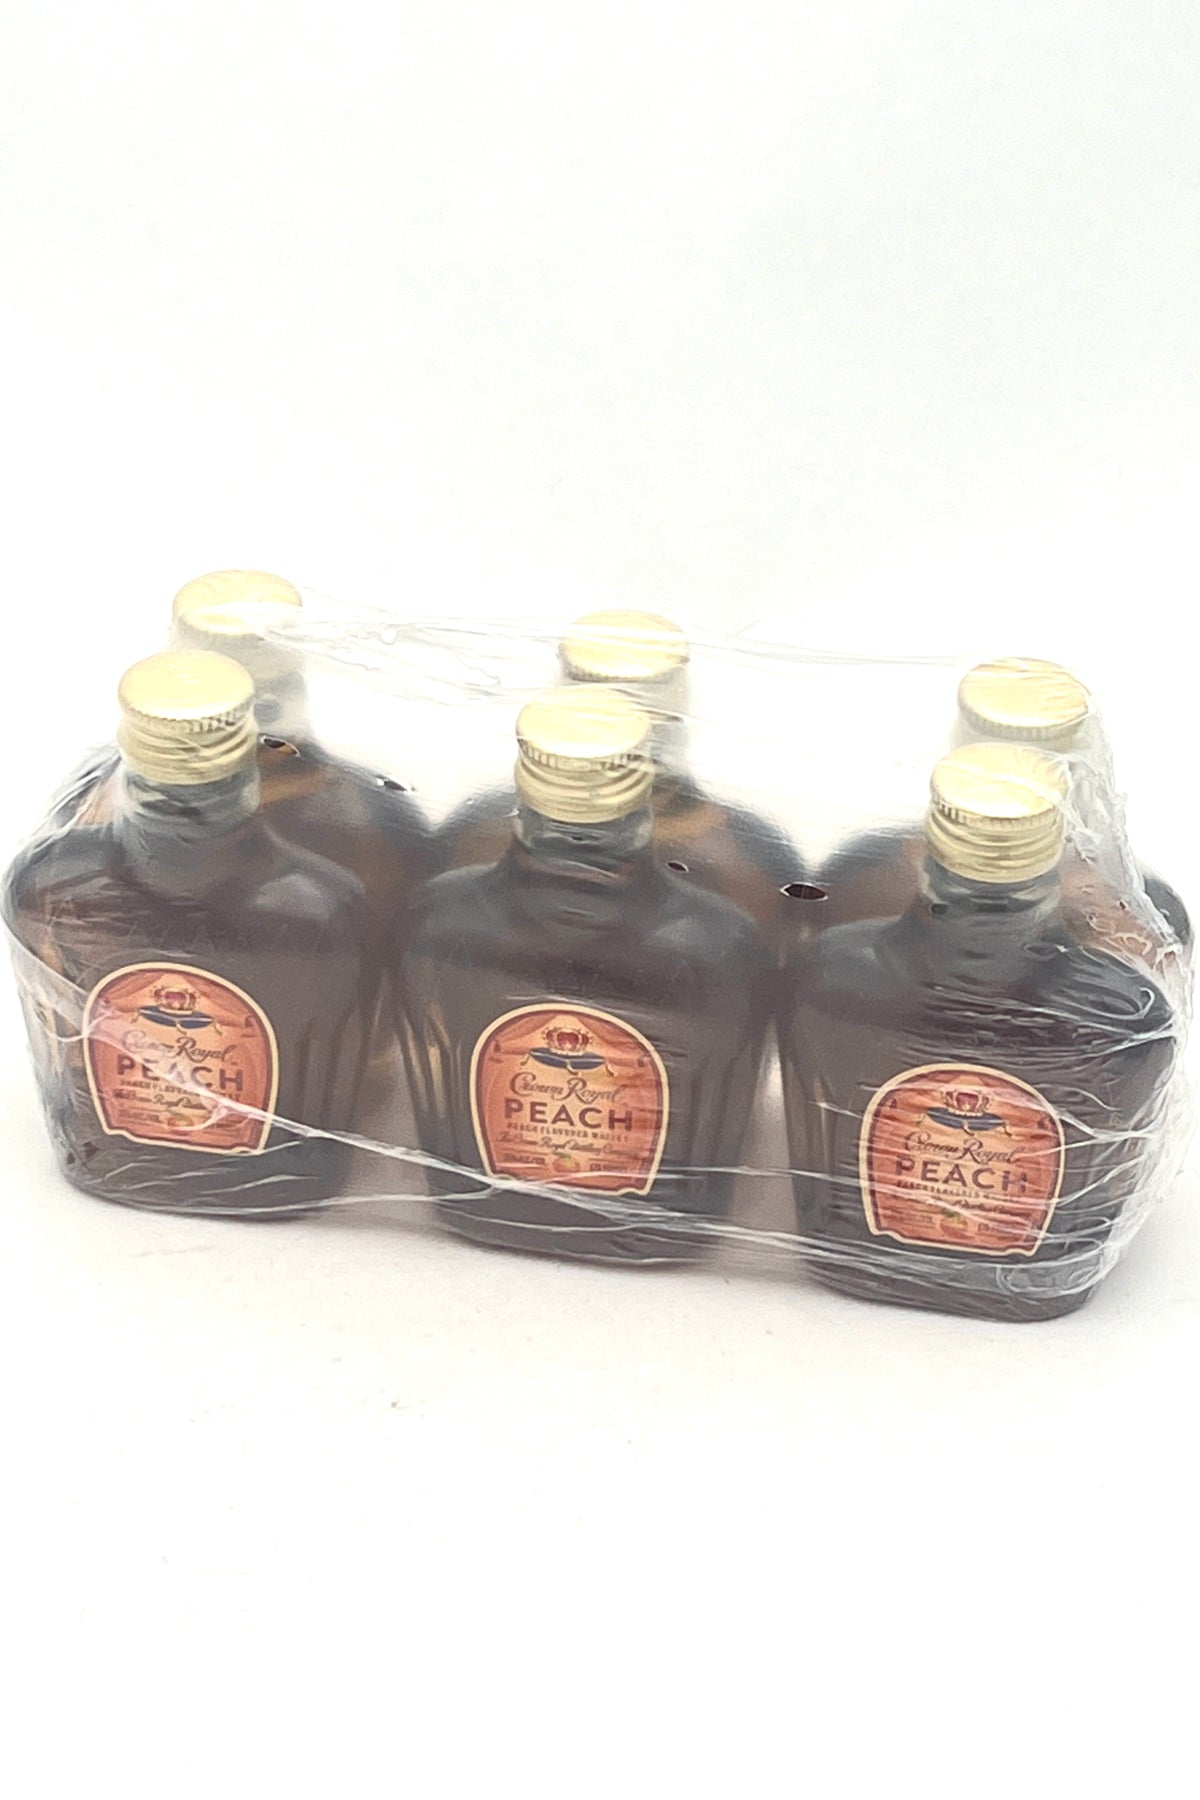 Crown Royal Peach Flavored Canadian Whisky 6 x 50 ml